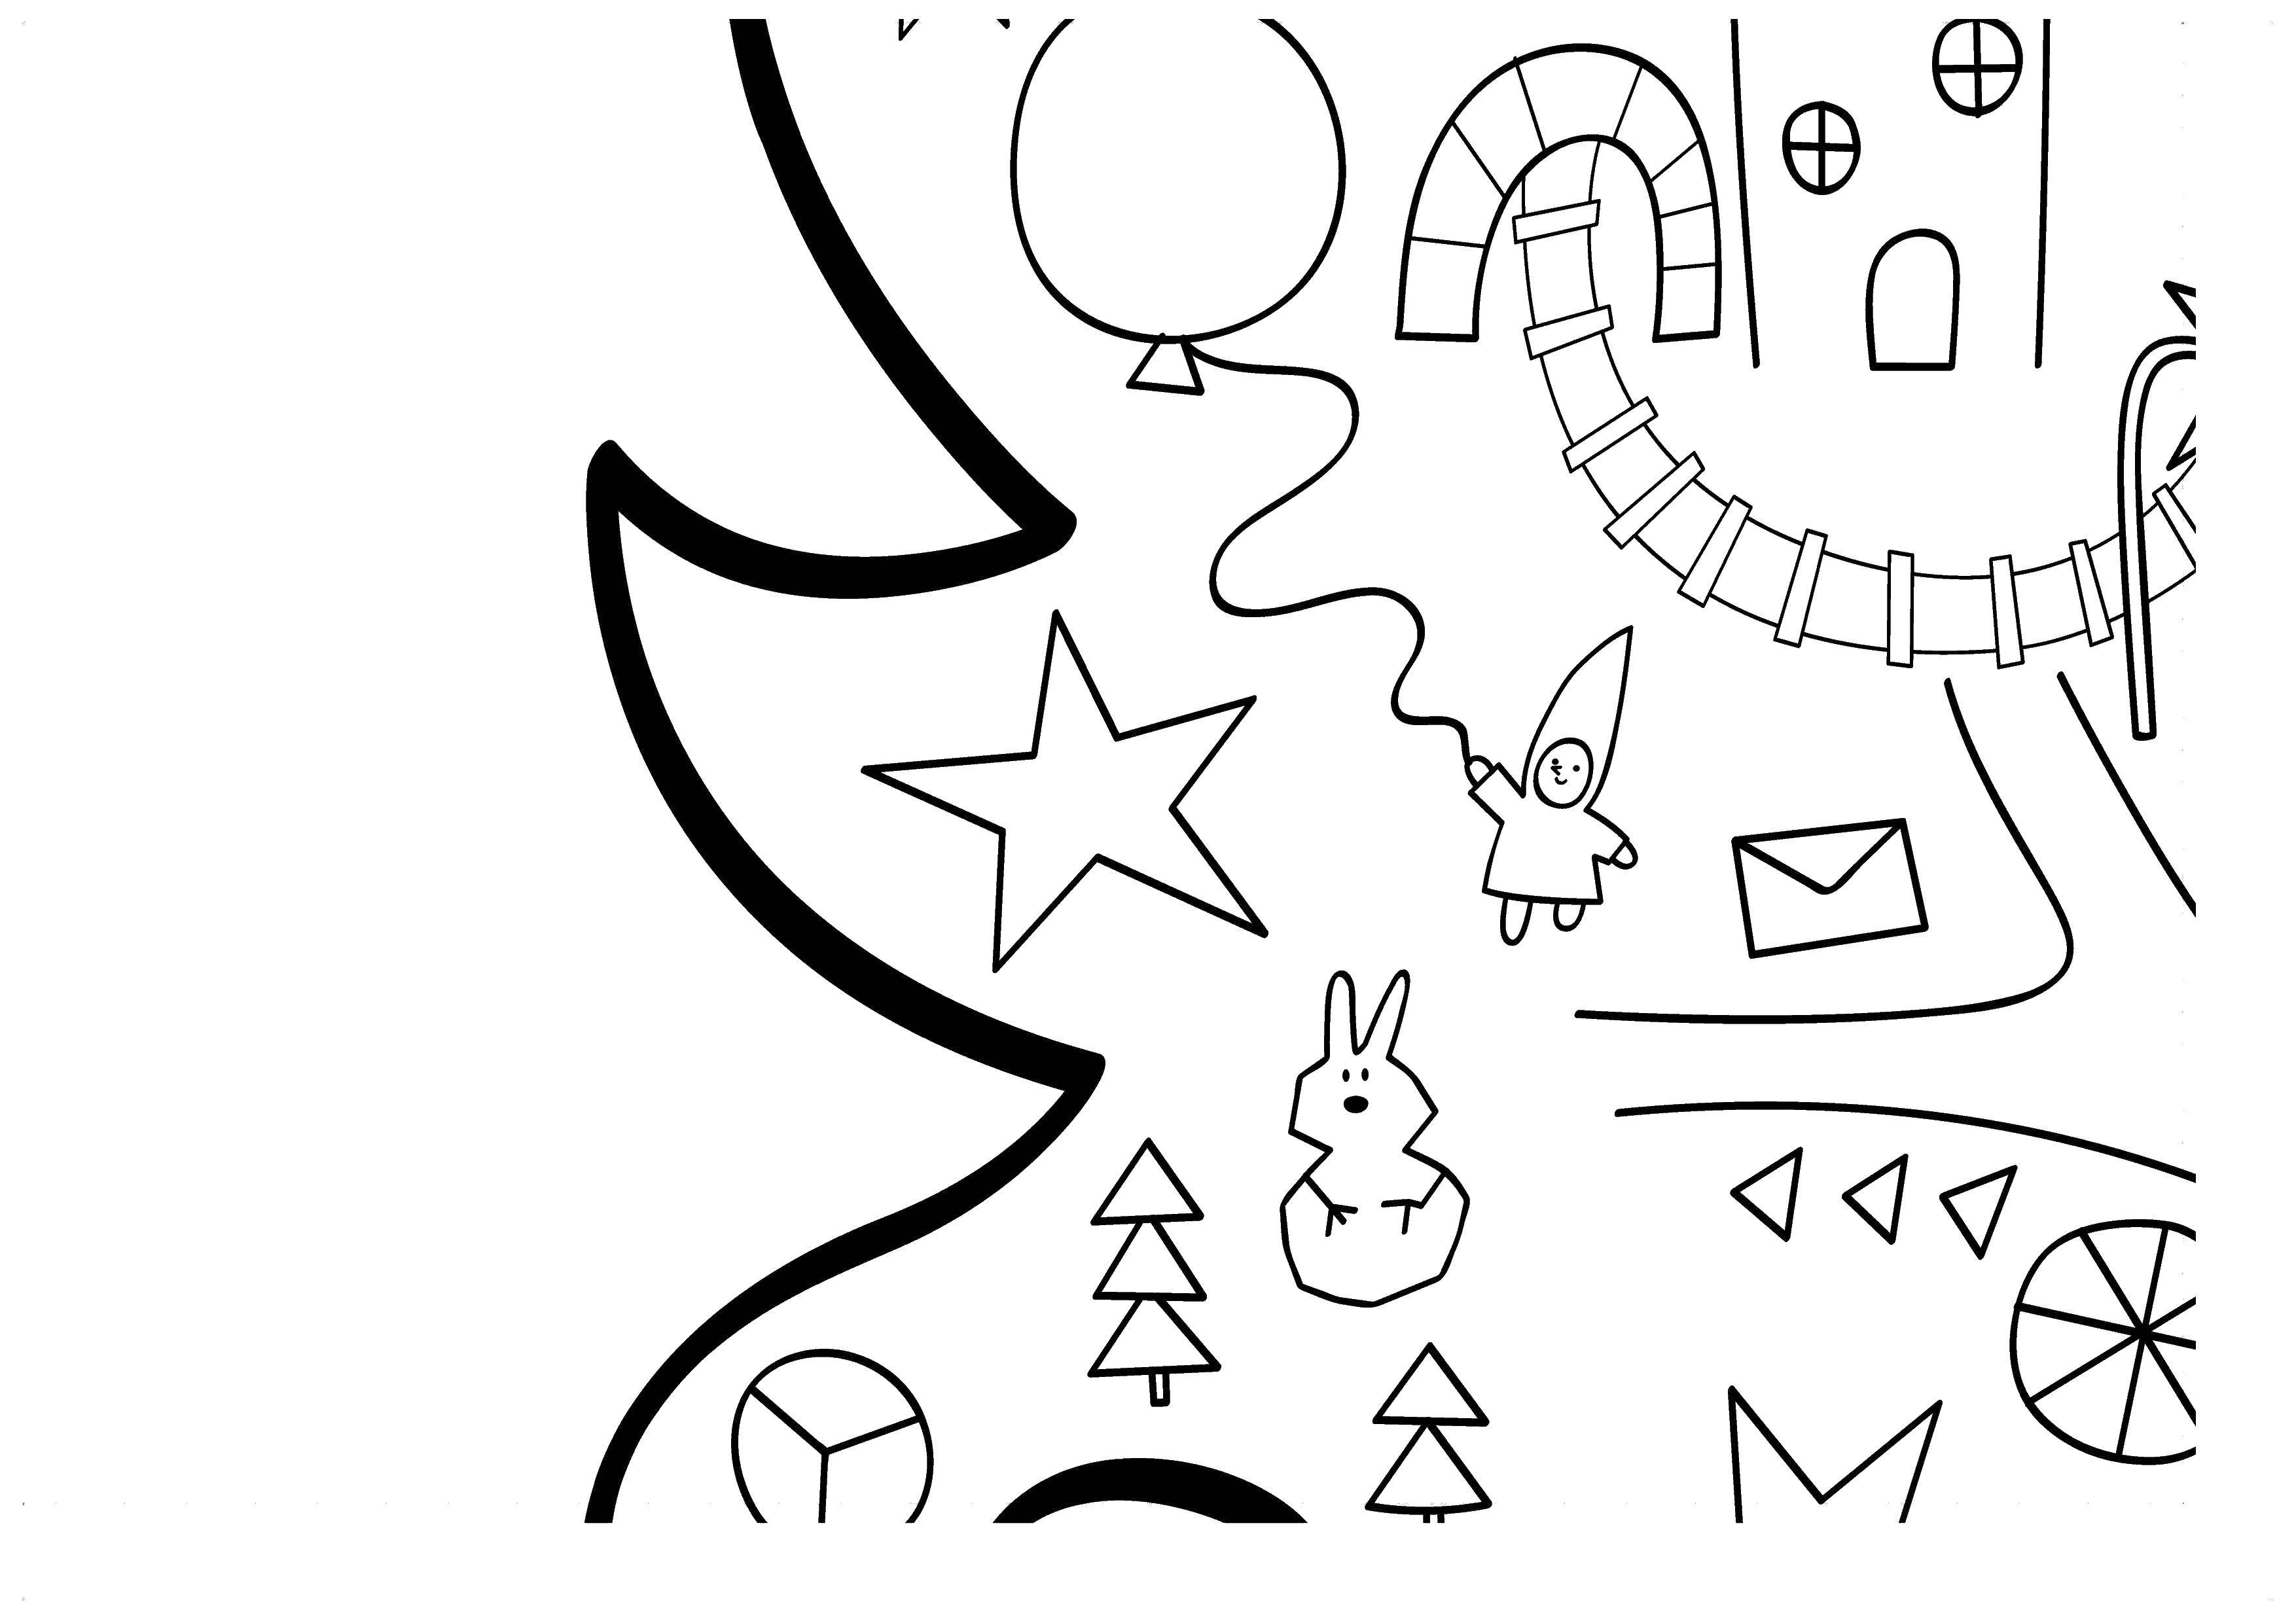 Coloring Christmas decorations. Category Coloring pages for kids. Tags:  Christmas decorations, Christmas tree.